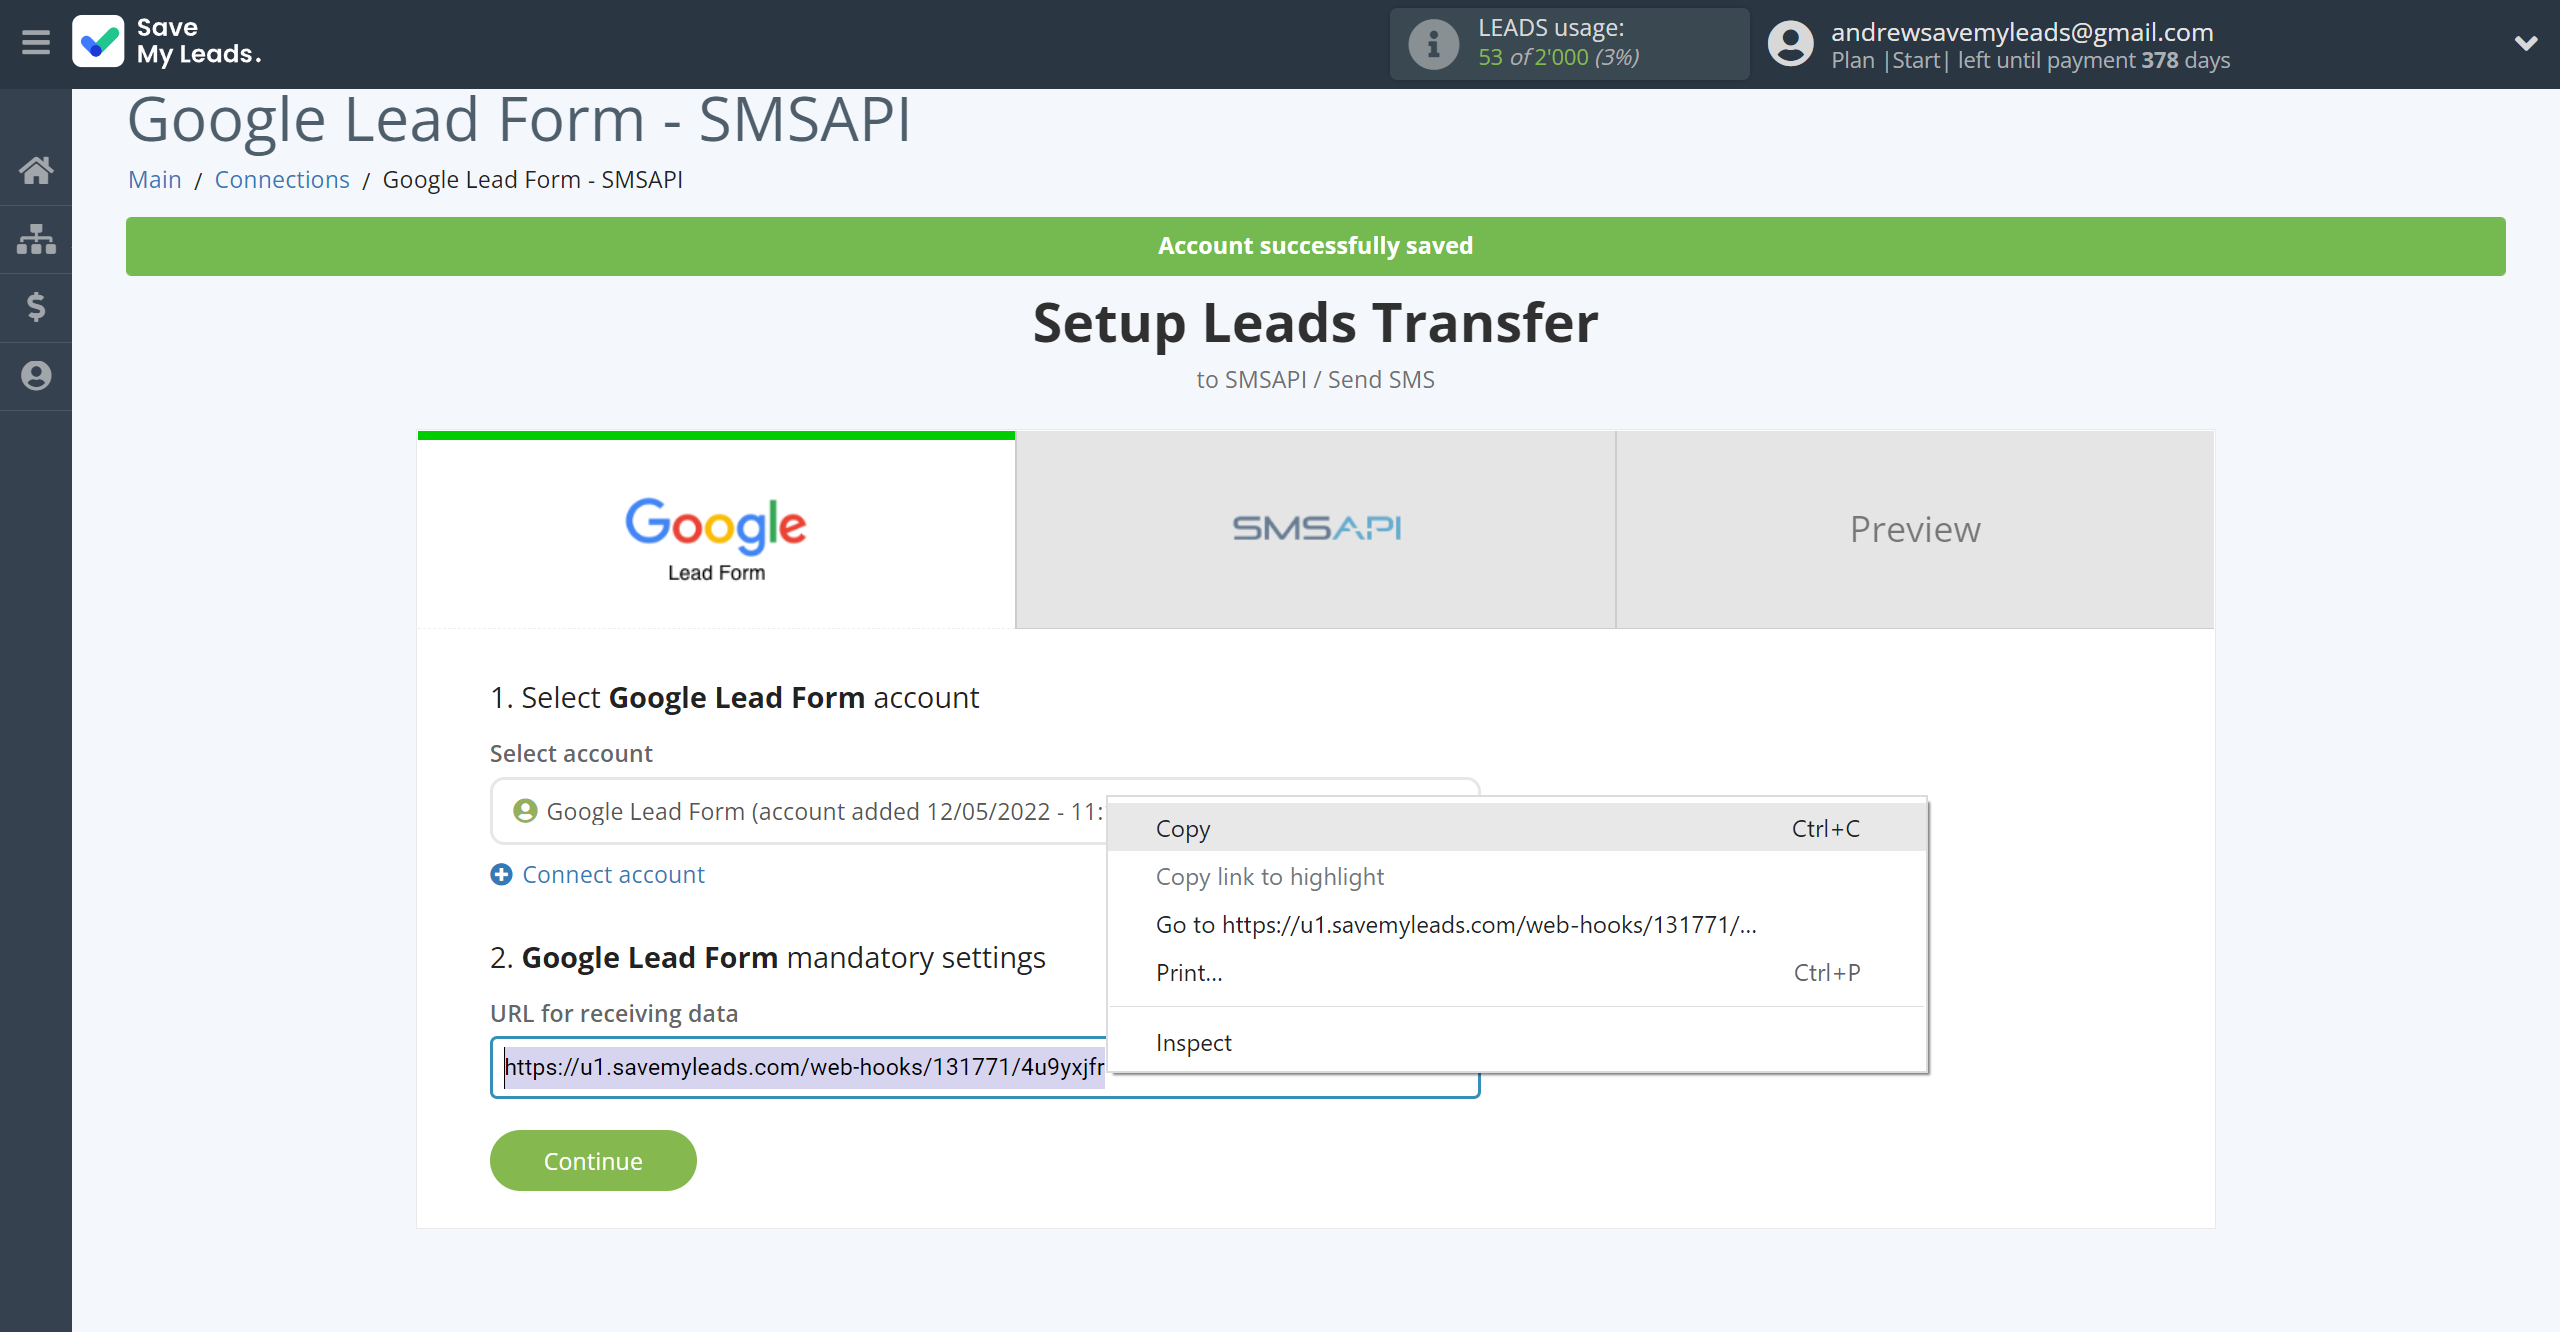 How to Connect Google Lead Form with SMSAPI | Data Source account connection